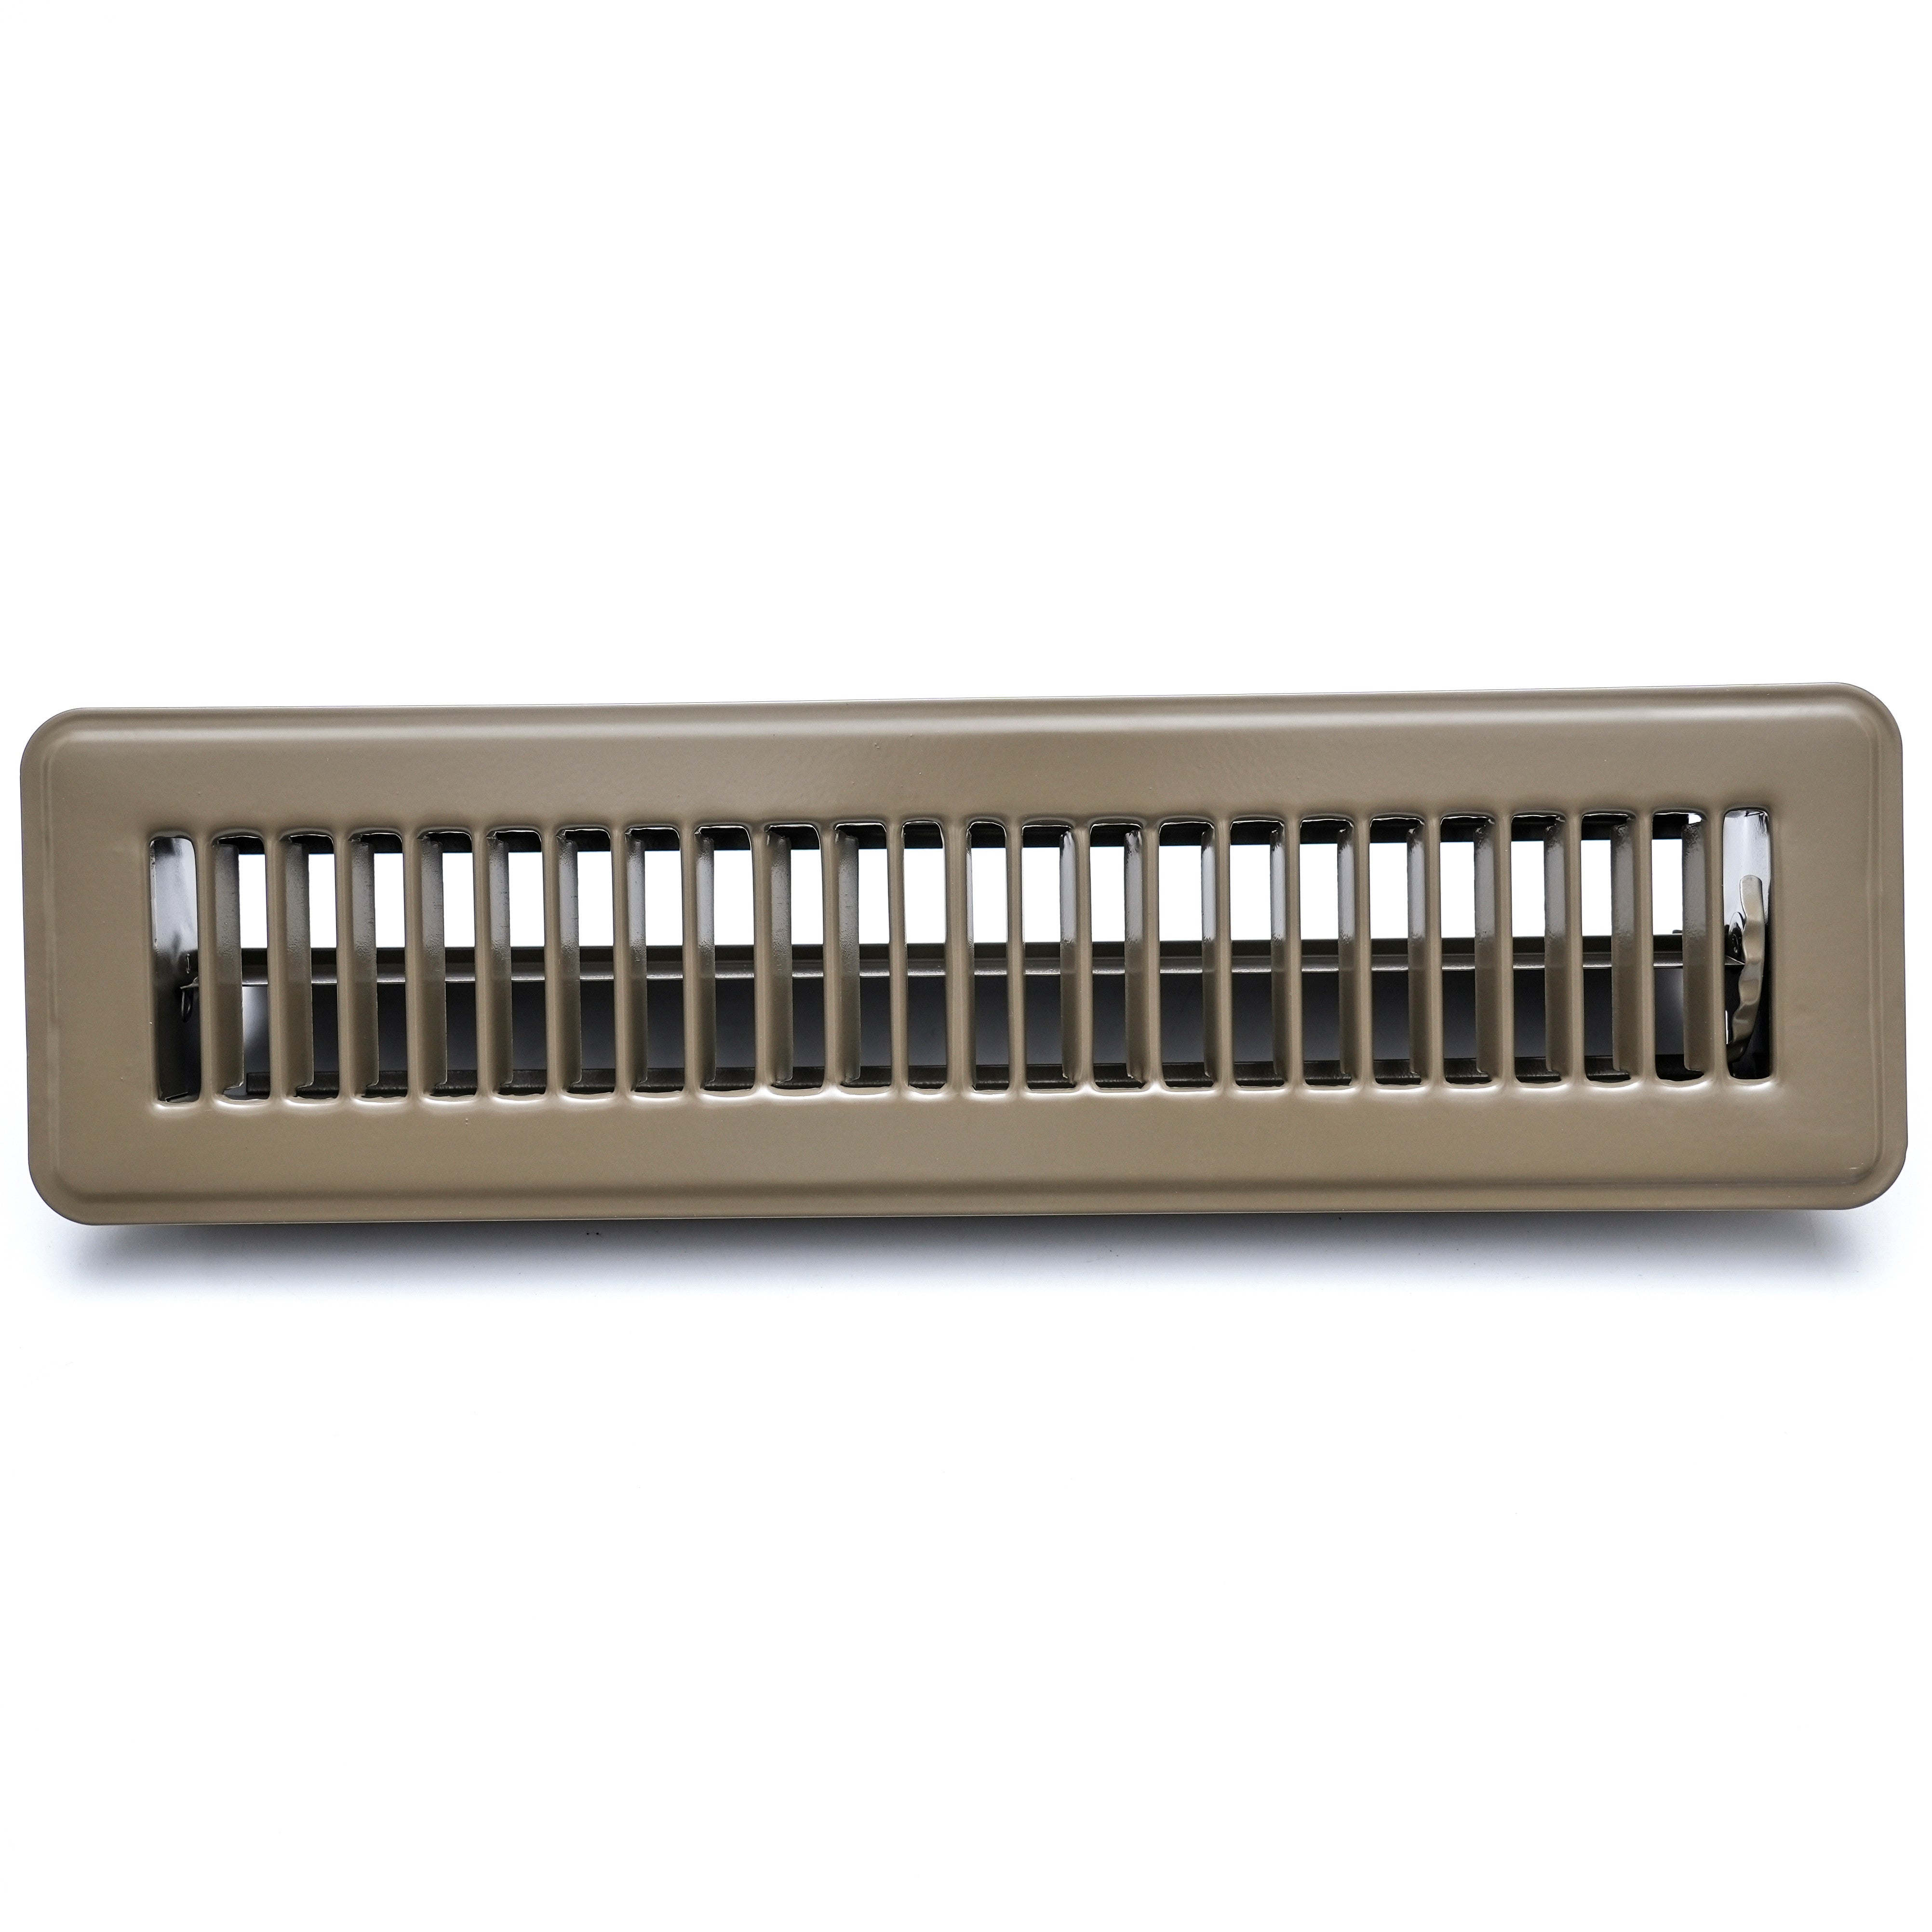 airgrilles 2" x 12" floor register with louvered design   heavy duty walkable design with damper   floor vent grille   easy to adjust air supply lever   brown hnd-flg-br-2x12  - 1